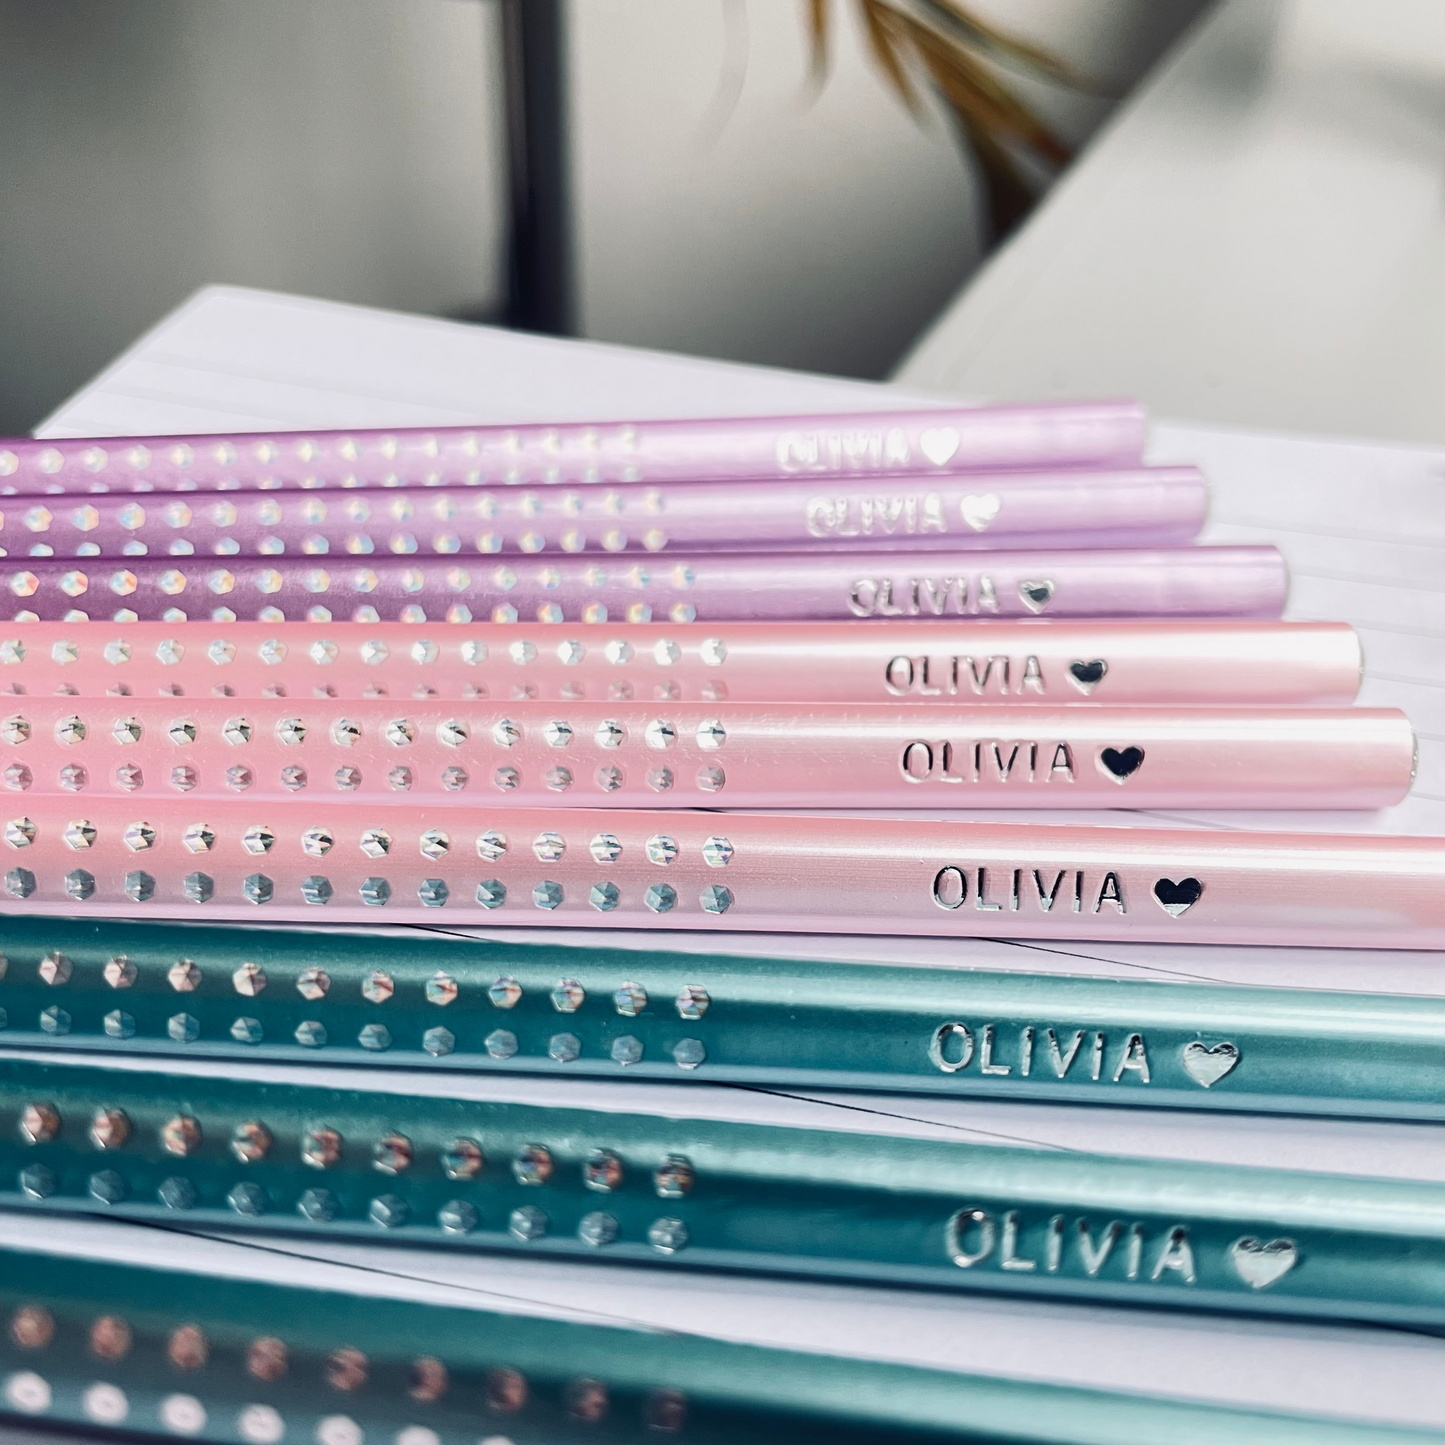 Assortment of Faber-Castell Sparkle Edition pencils with personalized name imprint, showcasing the metallic color variety.